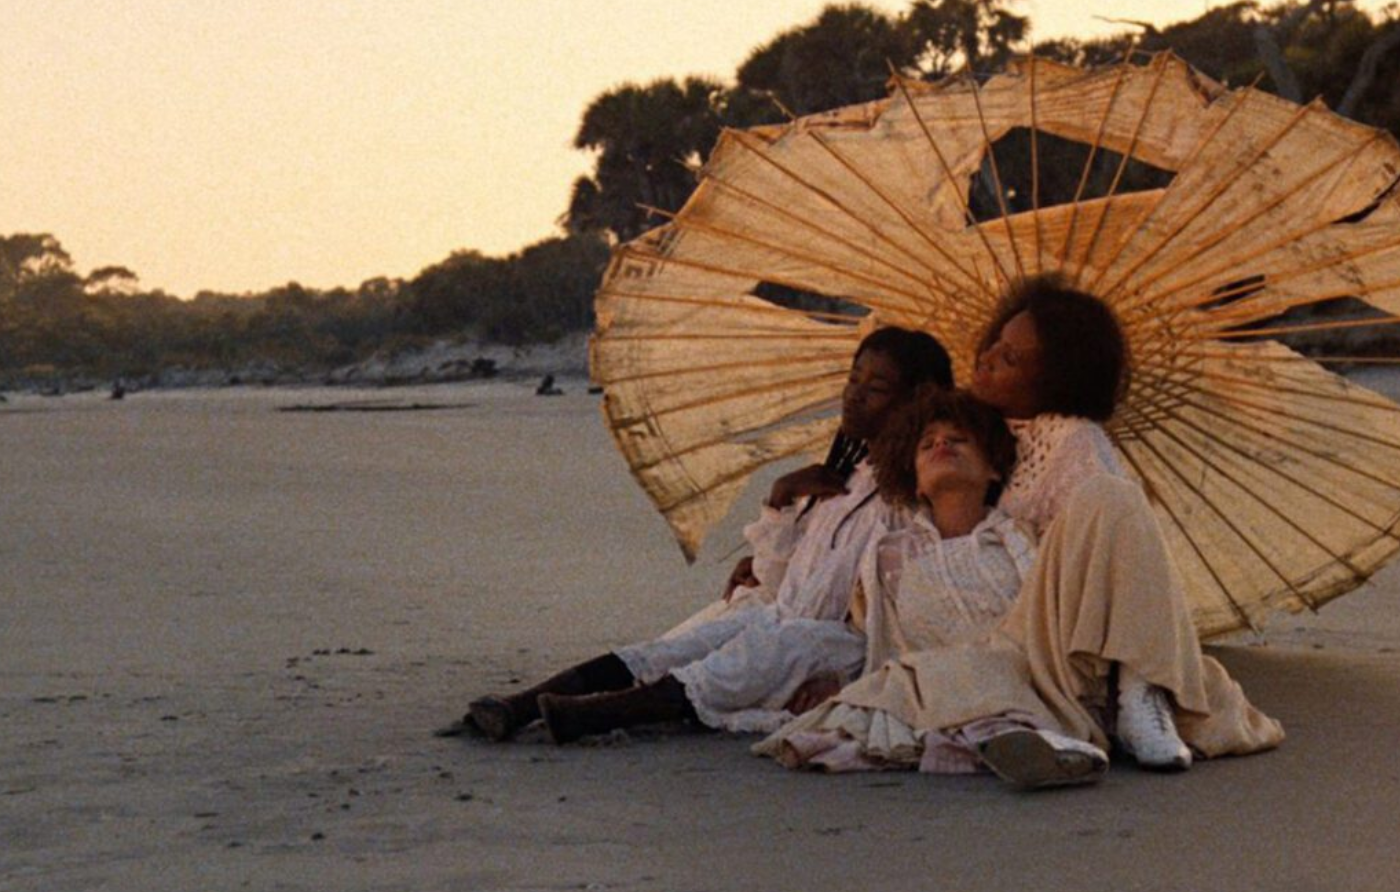 Daughters of the Dust (1991) still